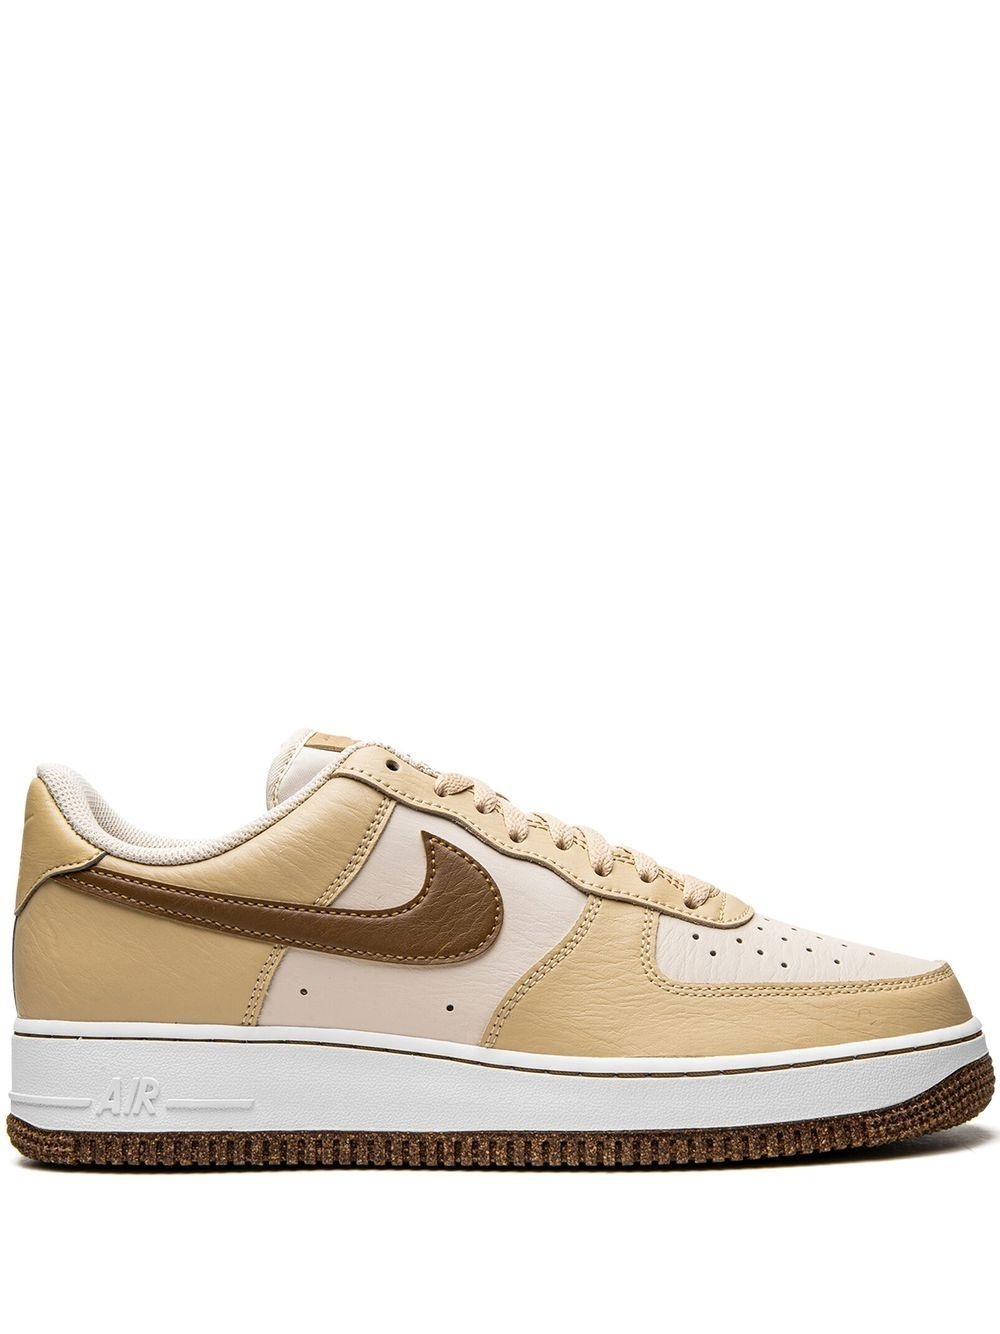 Air Force 1 Low '07 LV8 "Inspected By Swoosh" sneakers - 1